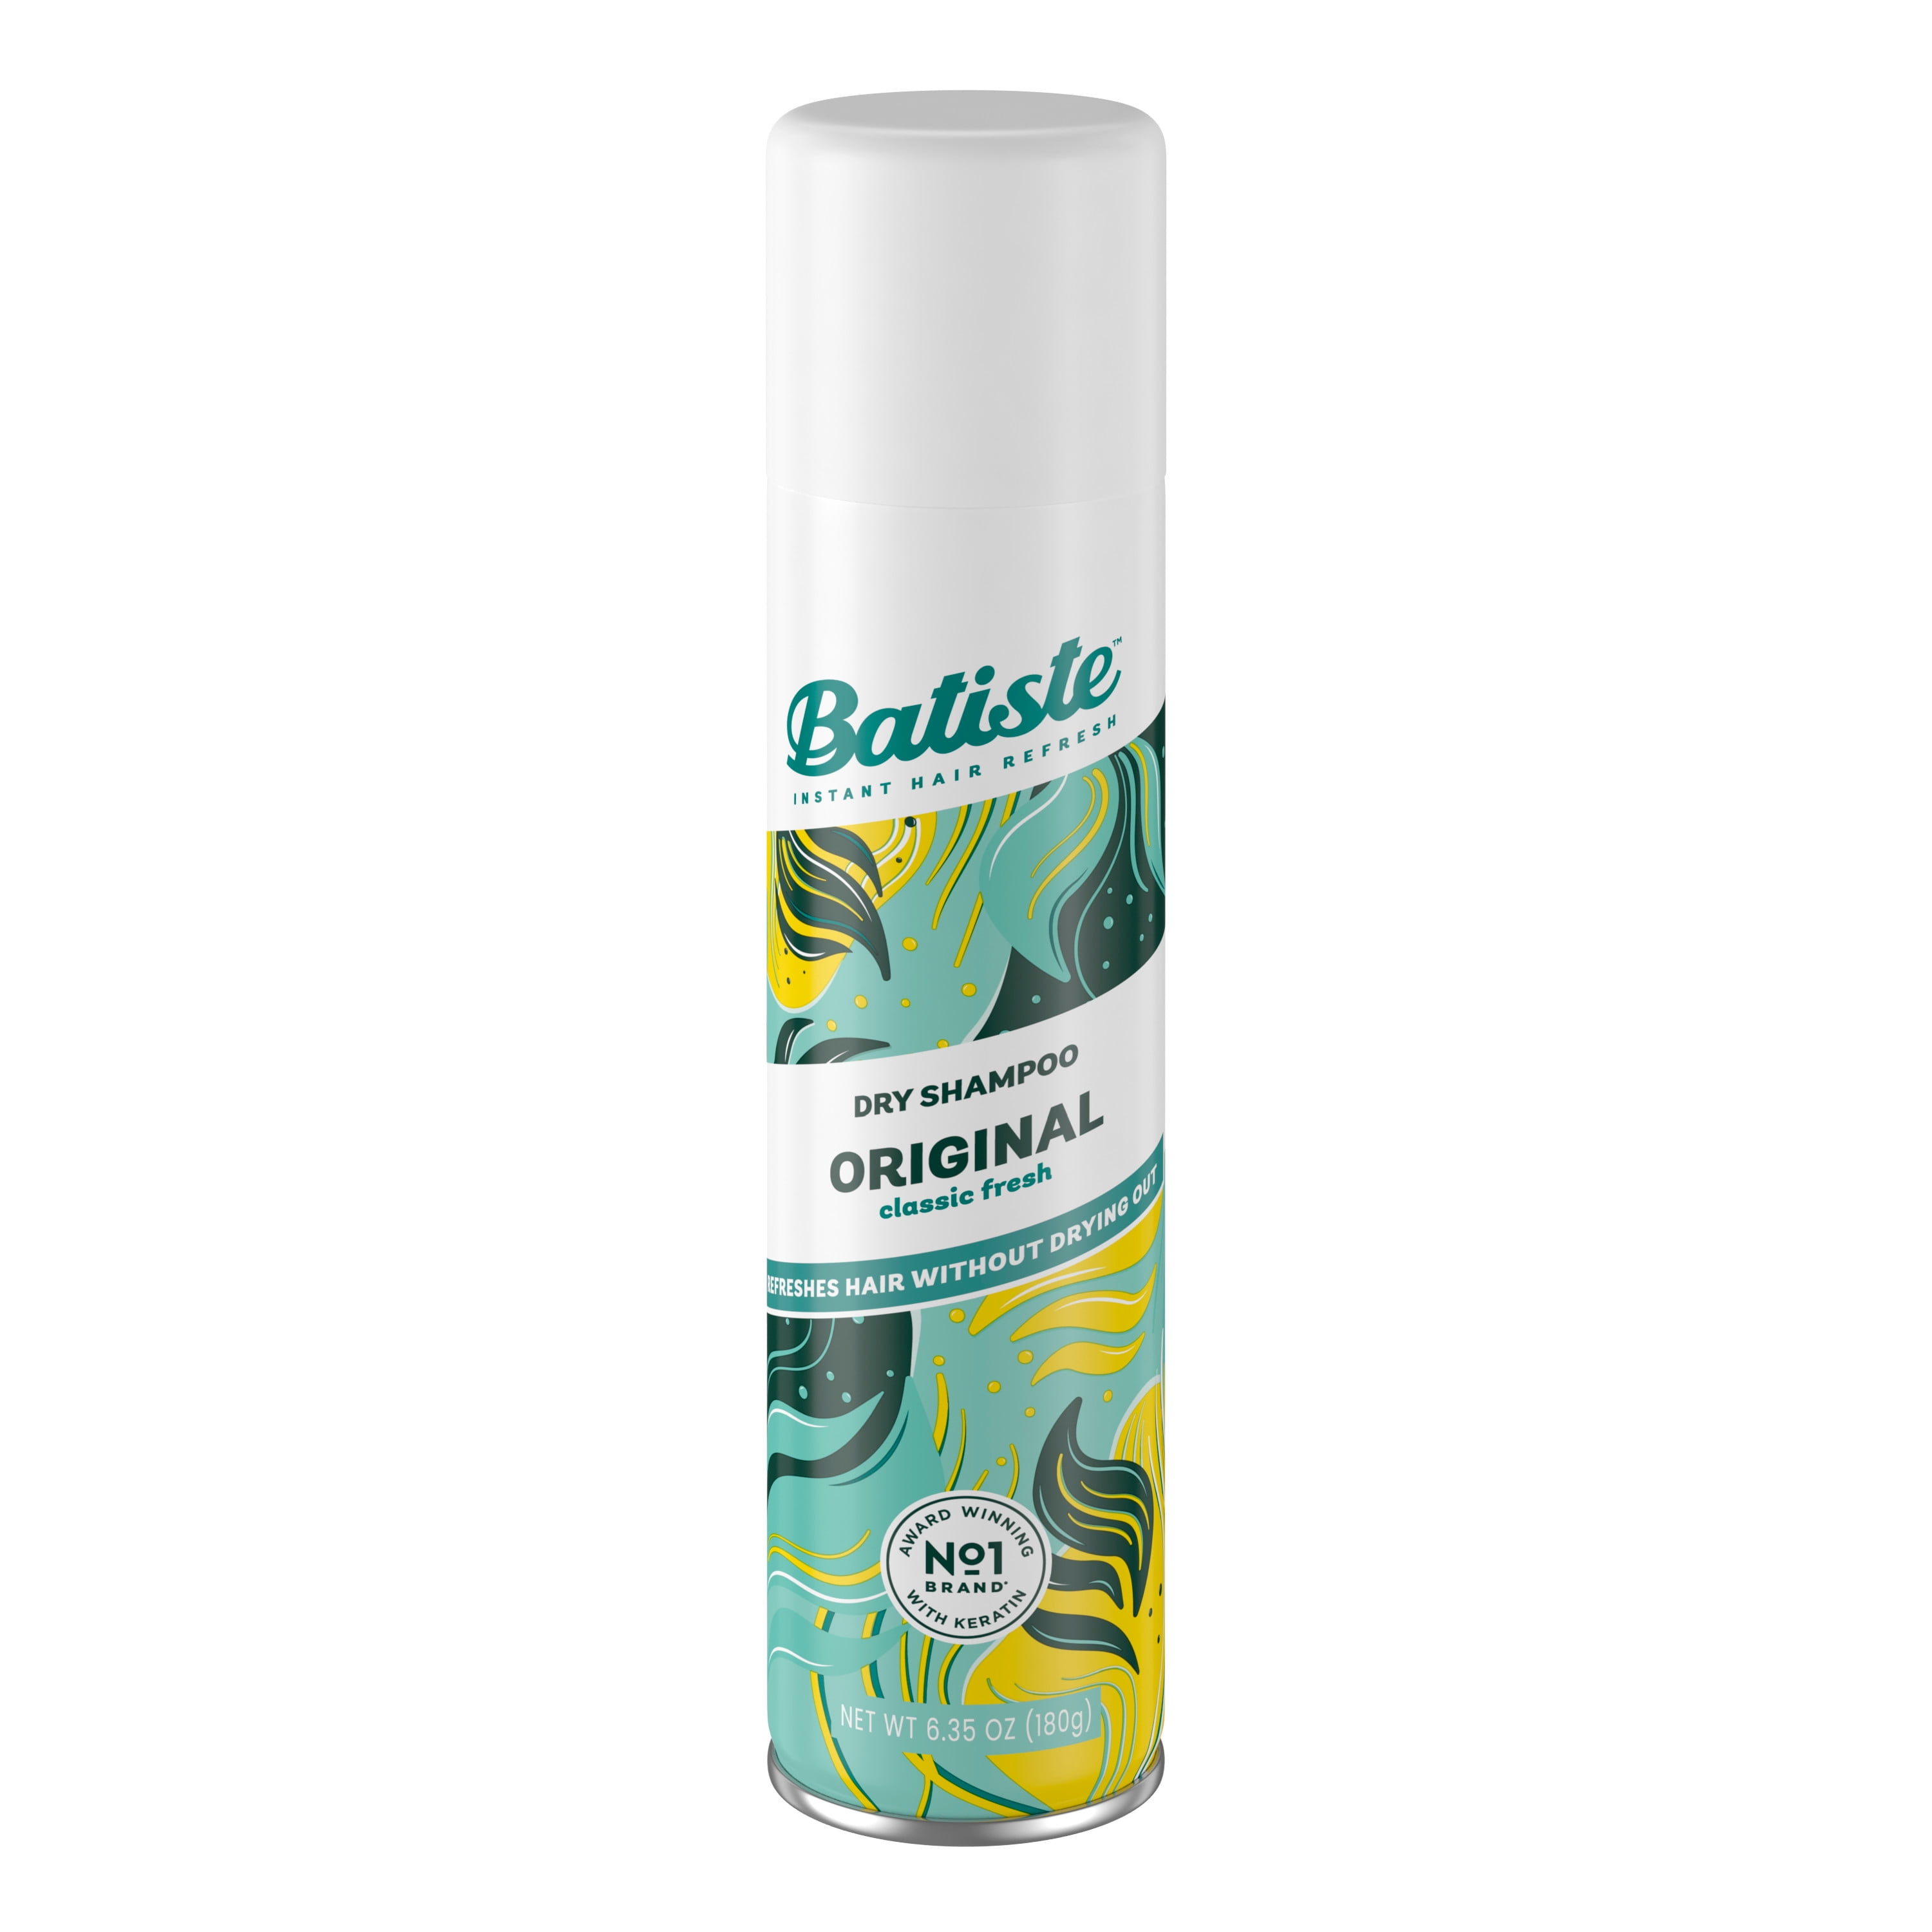 Batiste Dry Shampoo, Original Fragrance, Refresh Hair and Absorb Oil  Between Washes, Waterless Shampoo for Added Hair Texture and Body,  oz  Dry Shampoo Bottle 